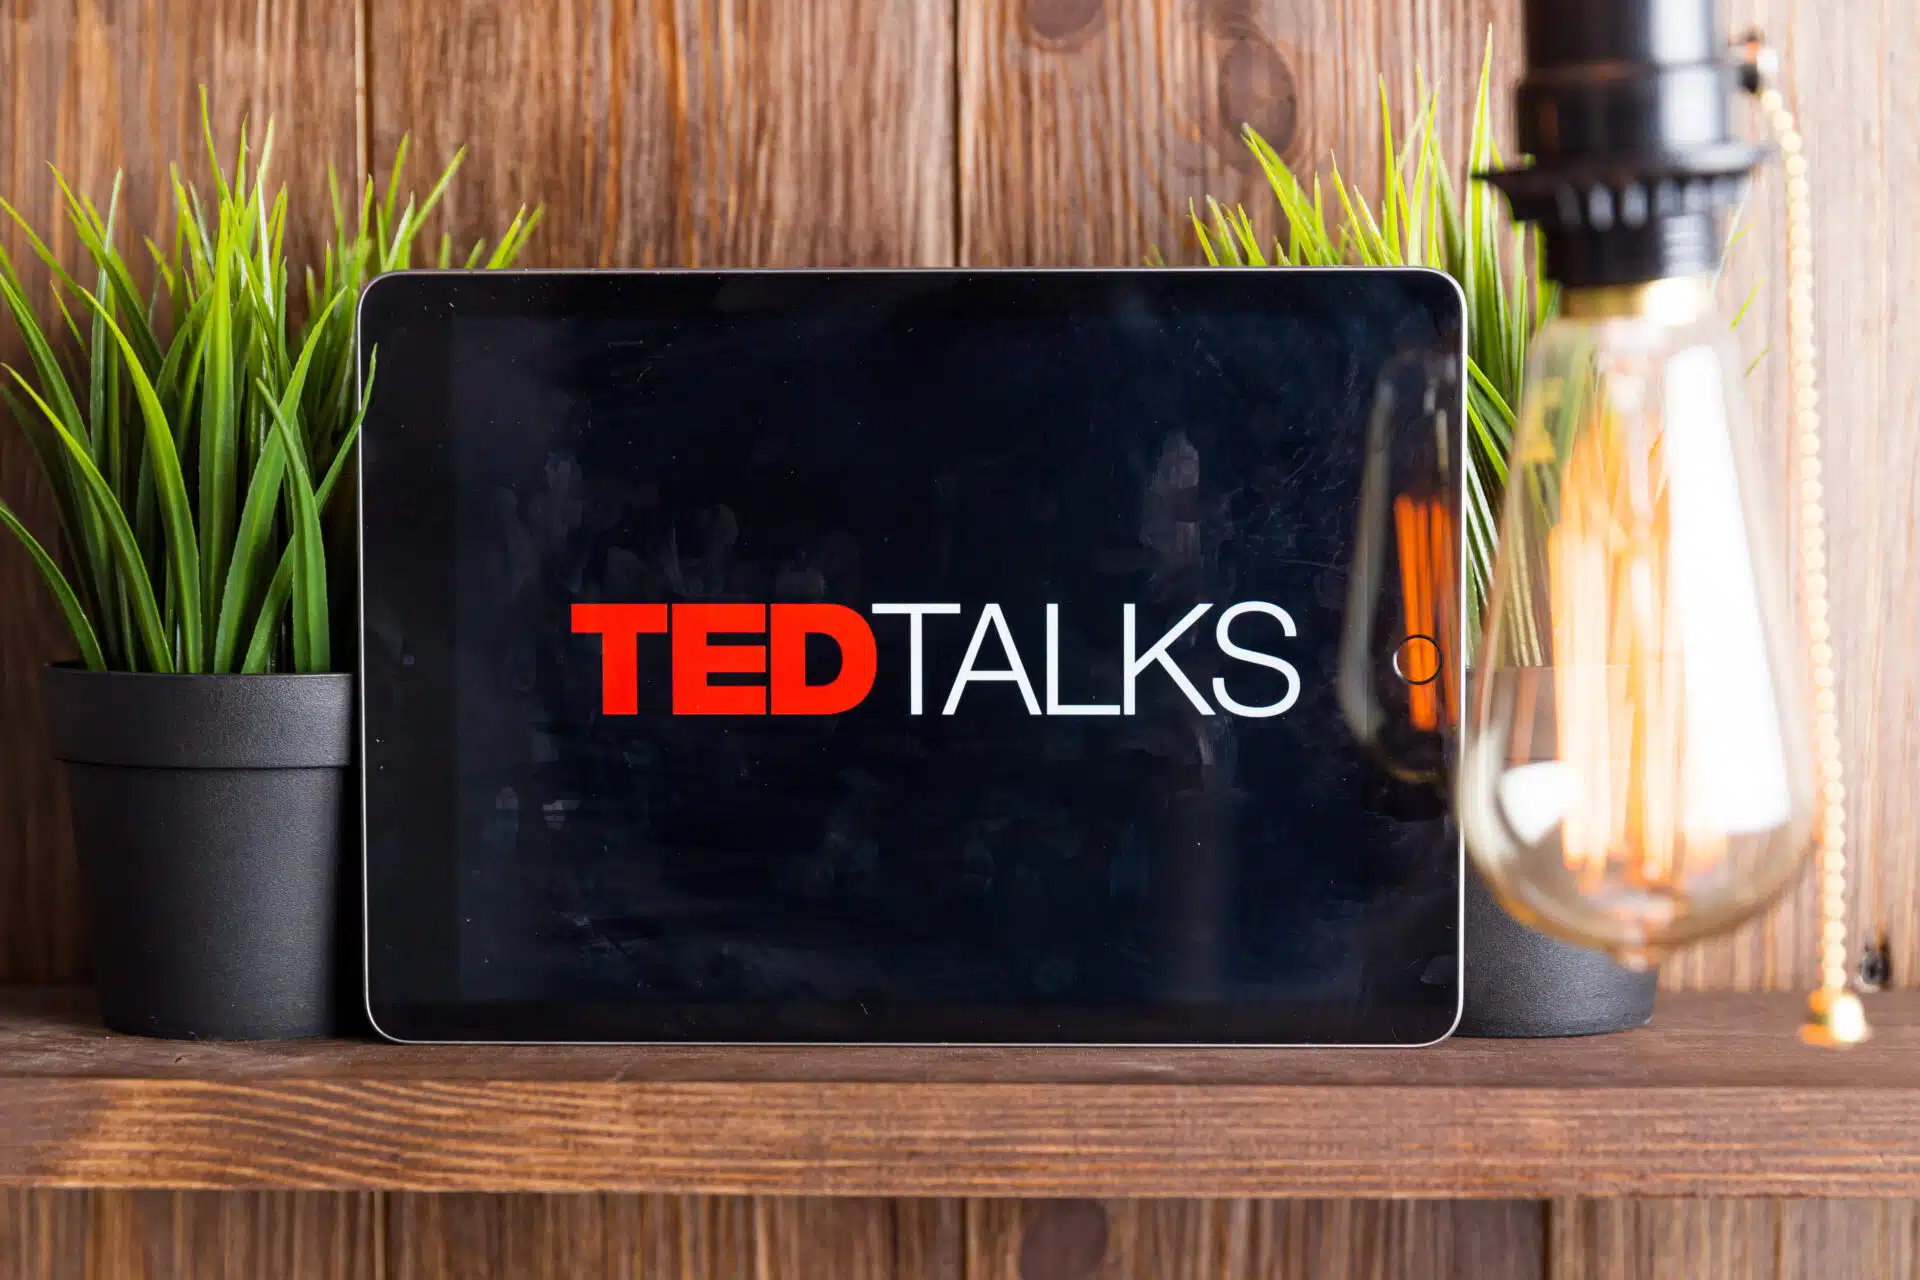 TED talks: a game for adult learners